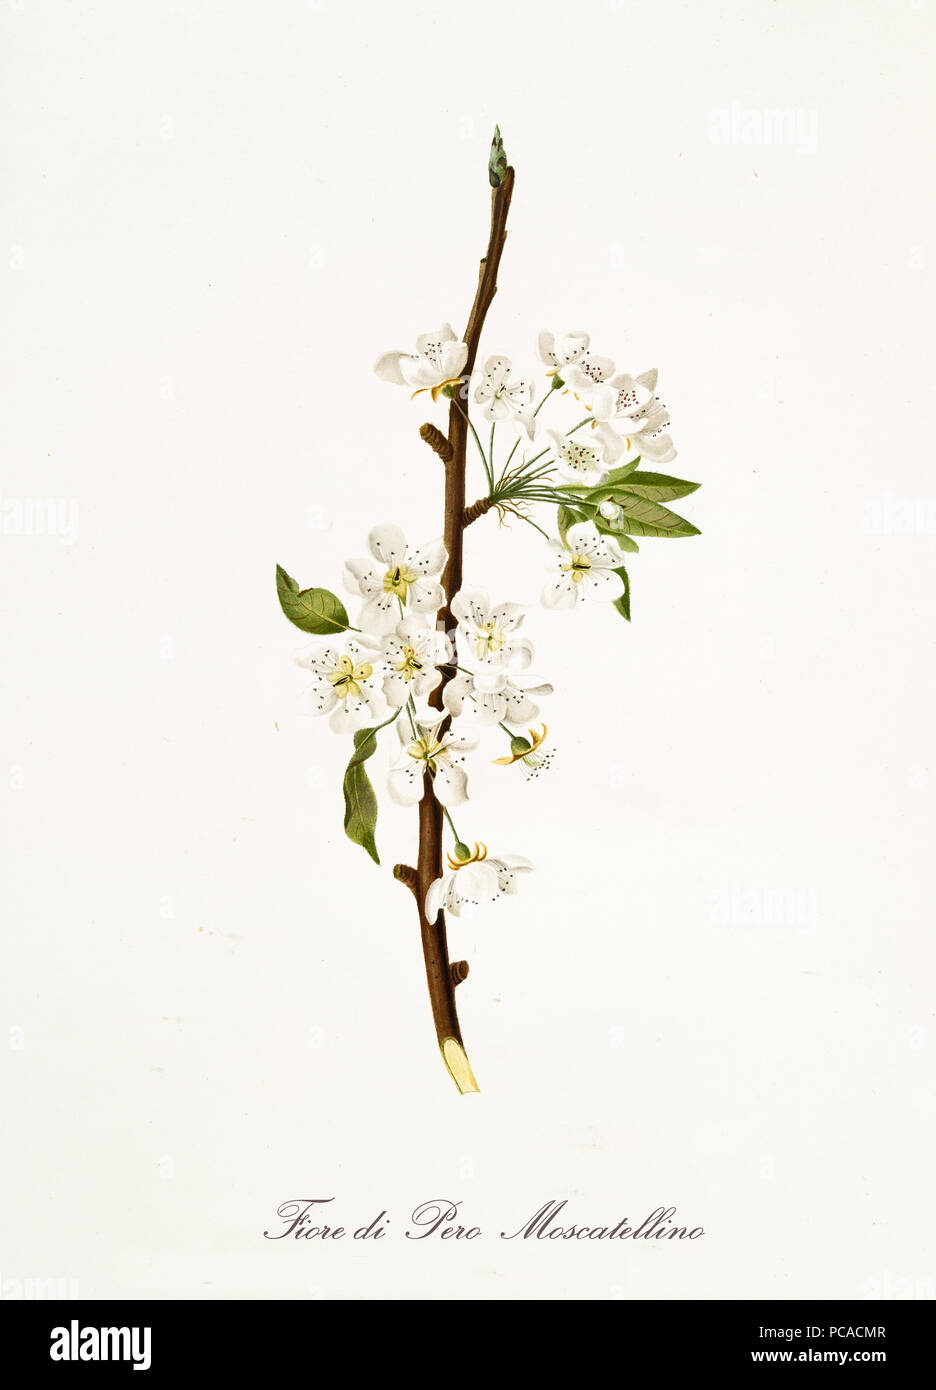 Isolated single branch of white pear flower vertical oriented on white background. Old botanical illustration realized with a detailed watercolor by Giorgio Gallesio on 1817,1839 Italy Stock Photo